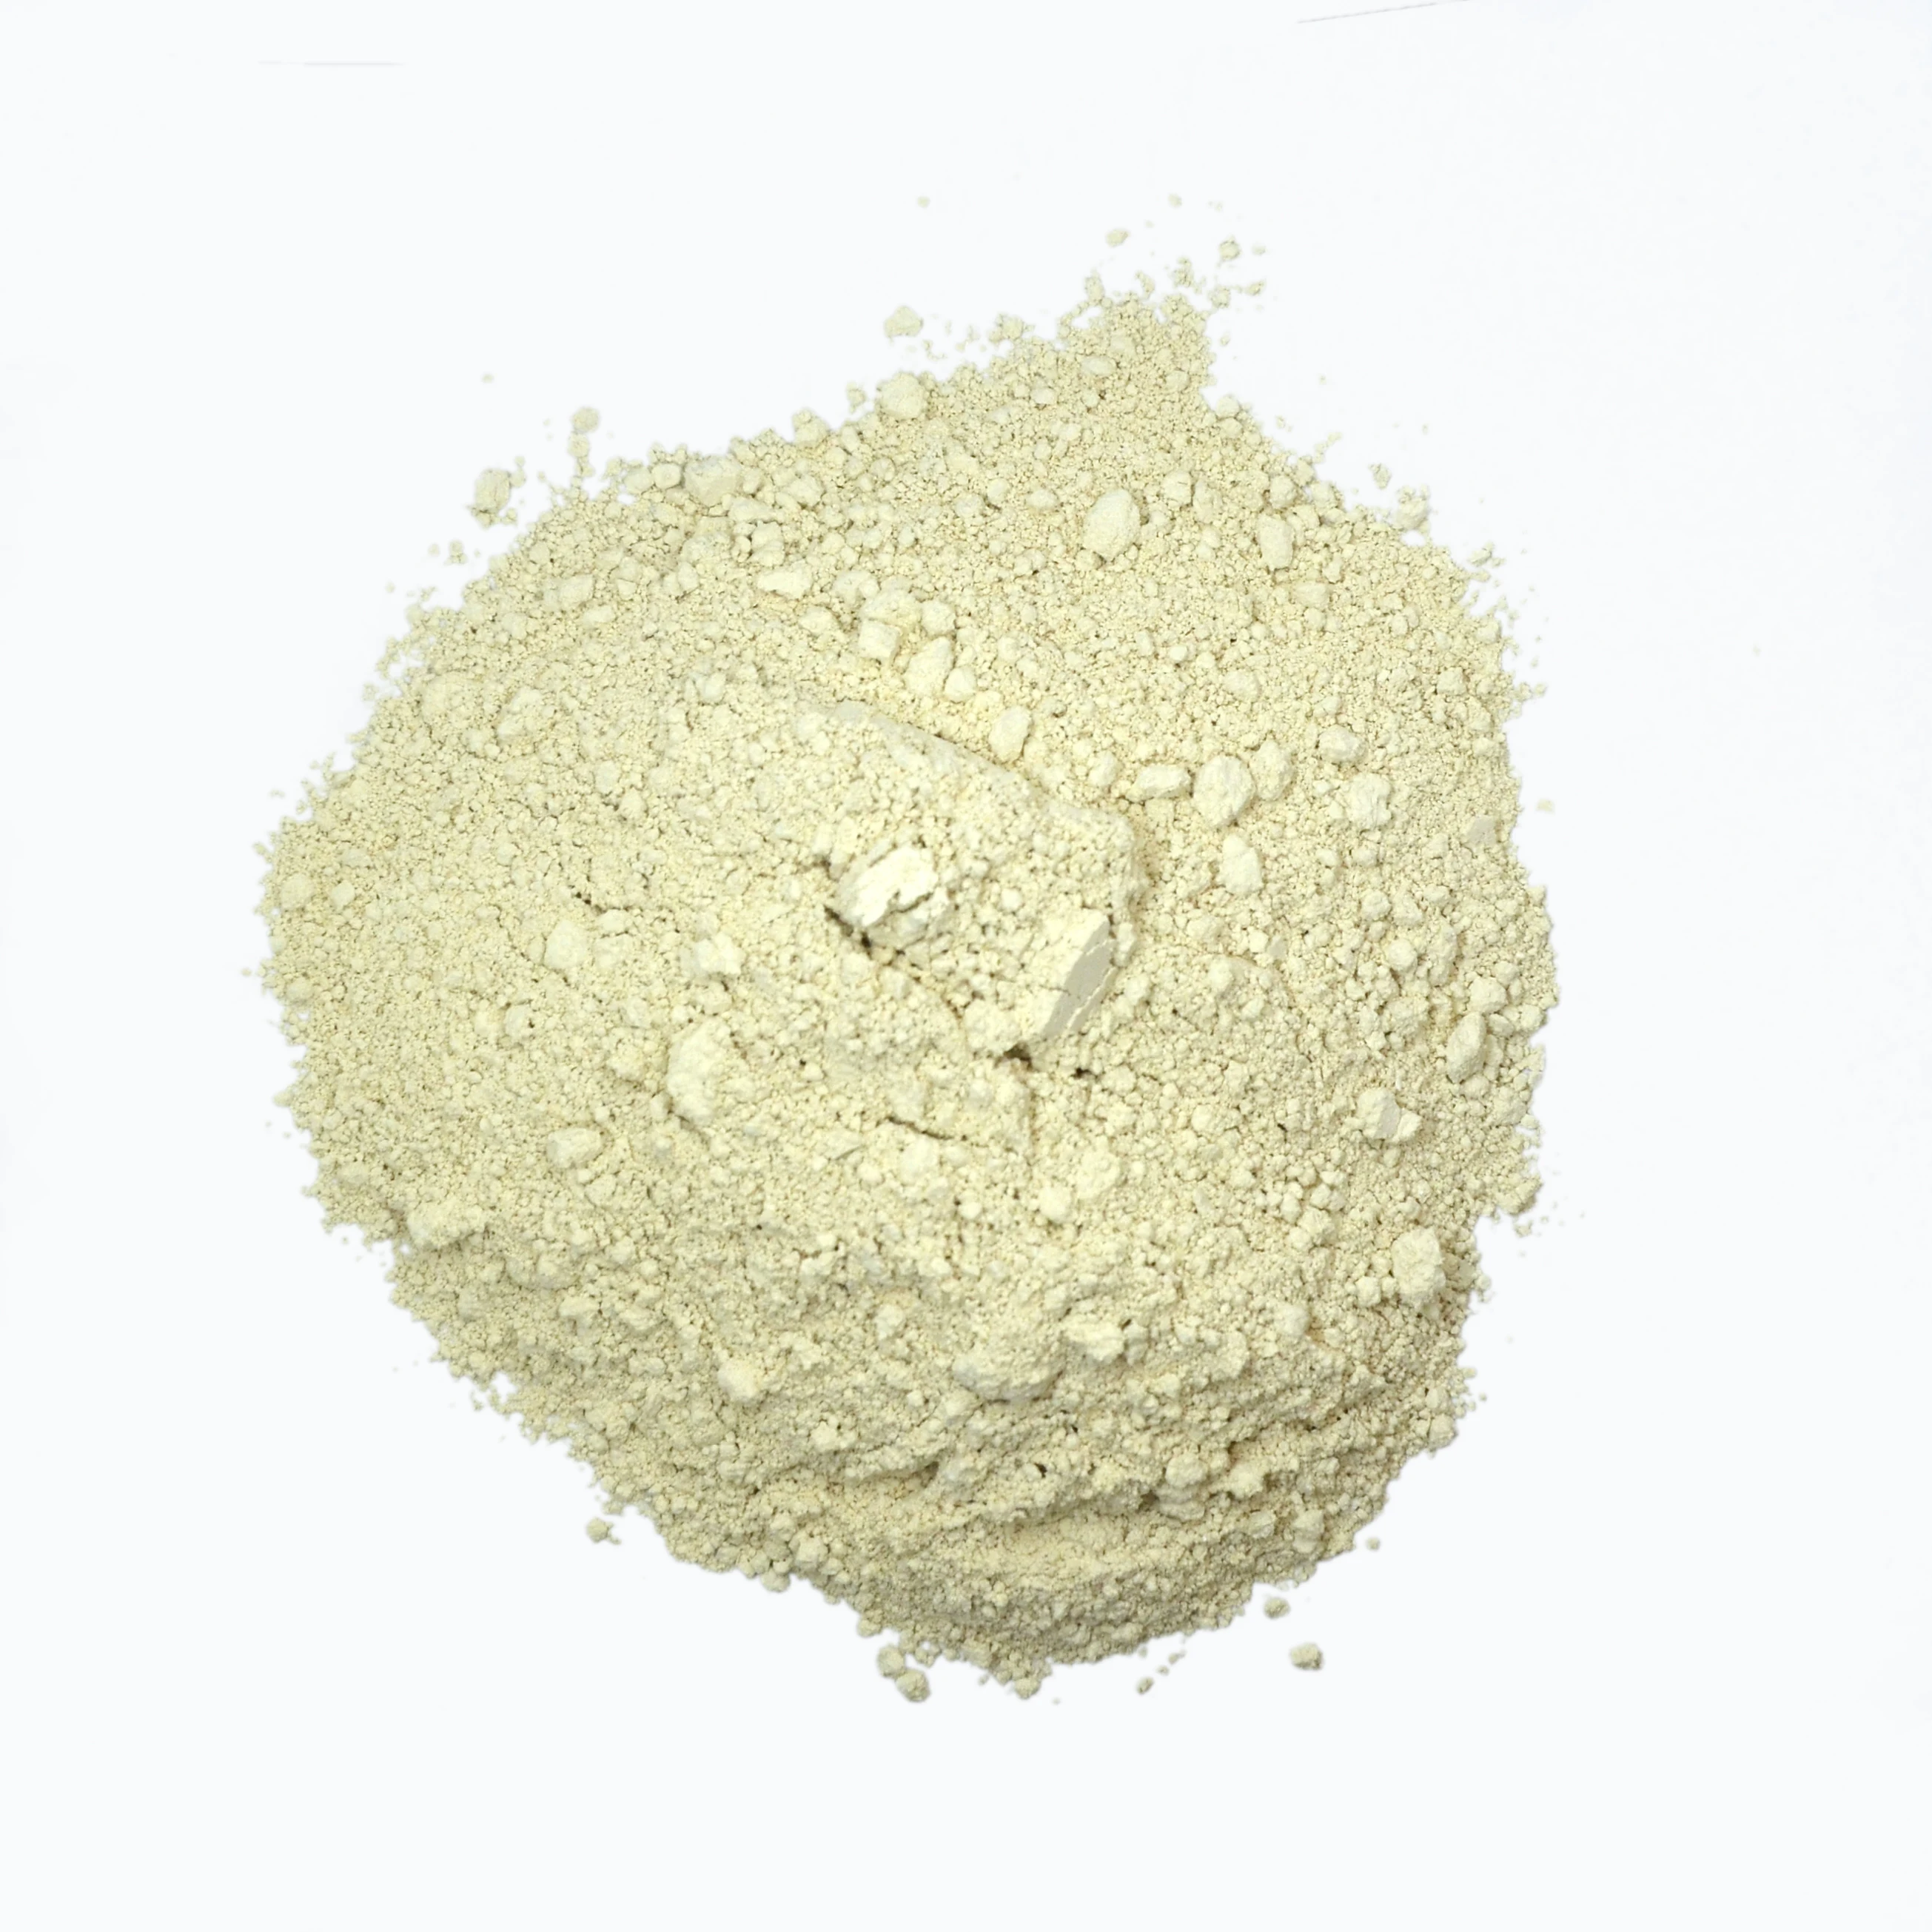 Cheaps price calcined wash kaolin clay powder metakaolin for paper making paint industry